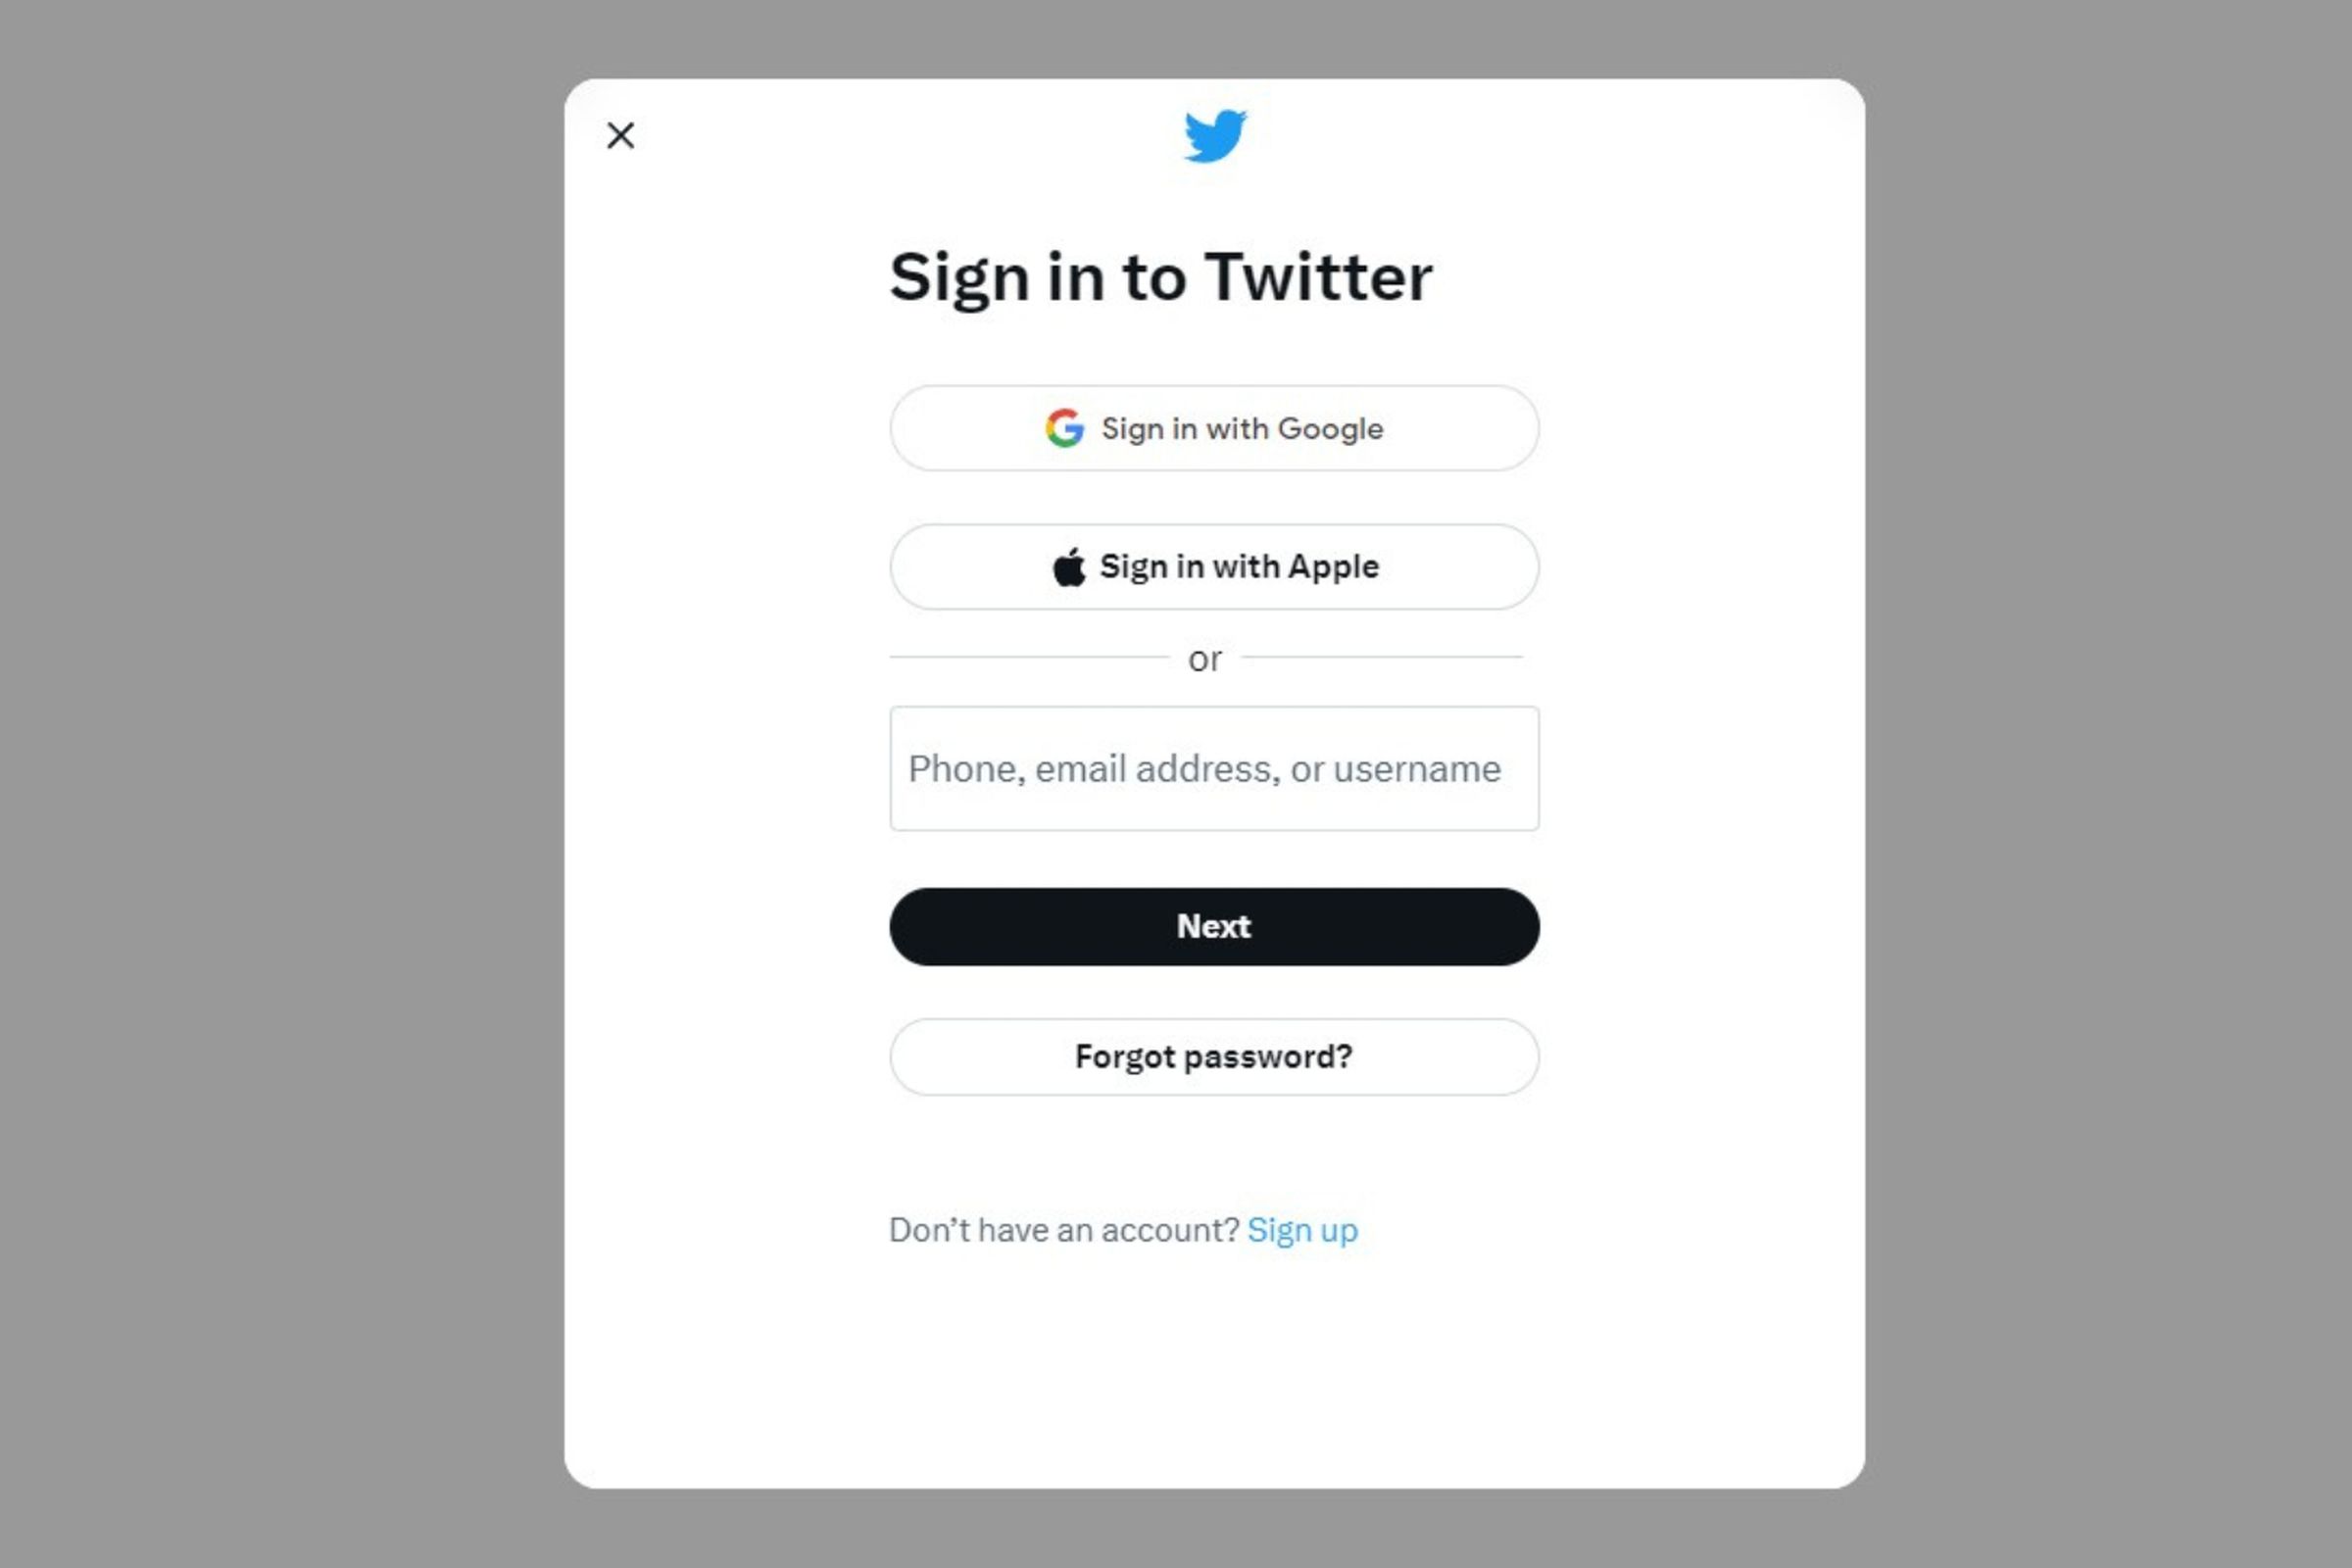 A screenshot of the Twitter sign in window